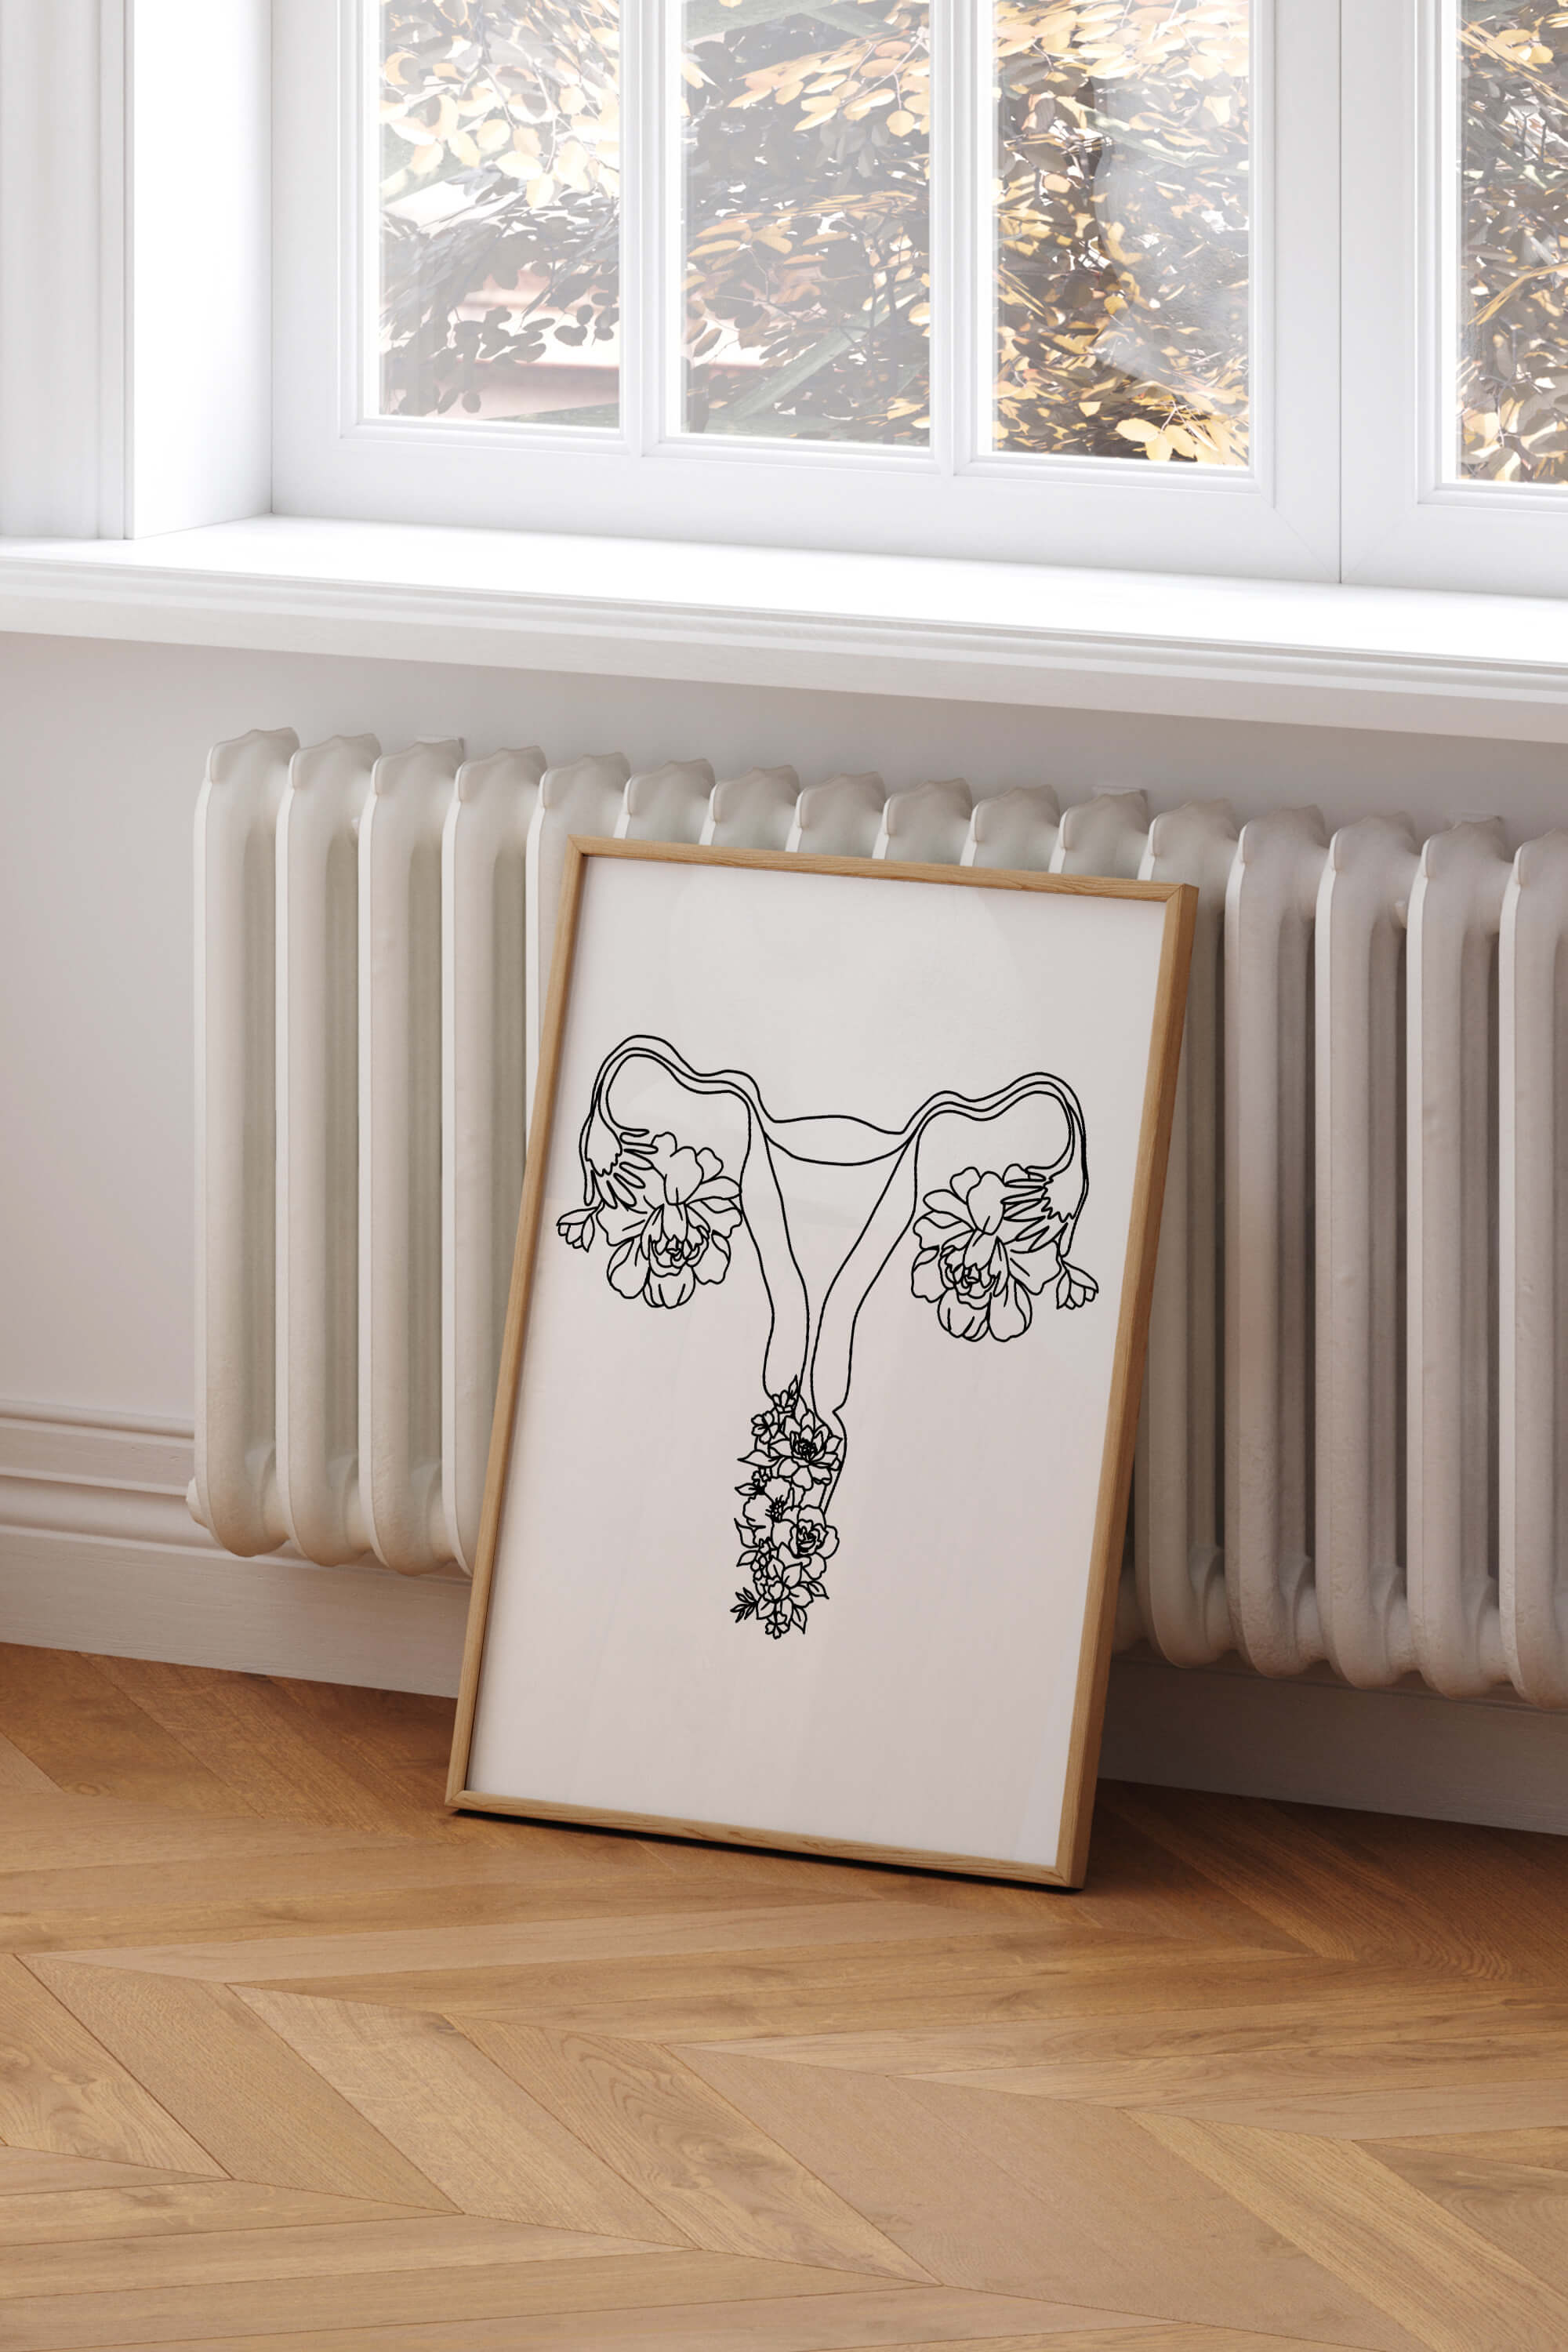 Empowering Female Anatomy Artwork. This artwork goes beyond decoration, telling a story of courage and grace. Transform your space into a haven of empowerment with this feminist wall art.